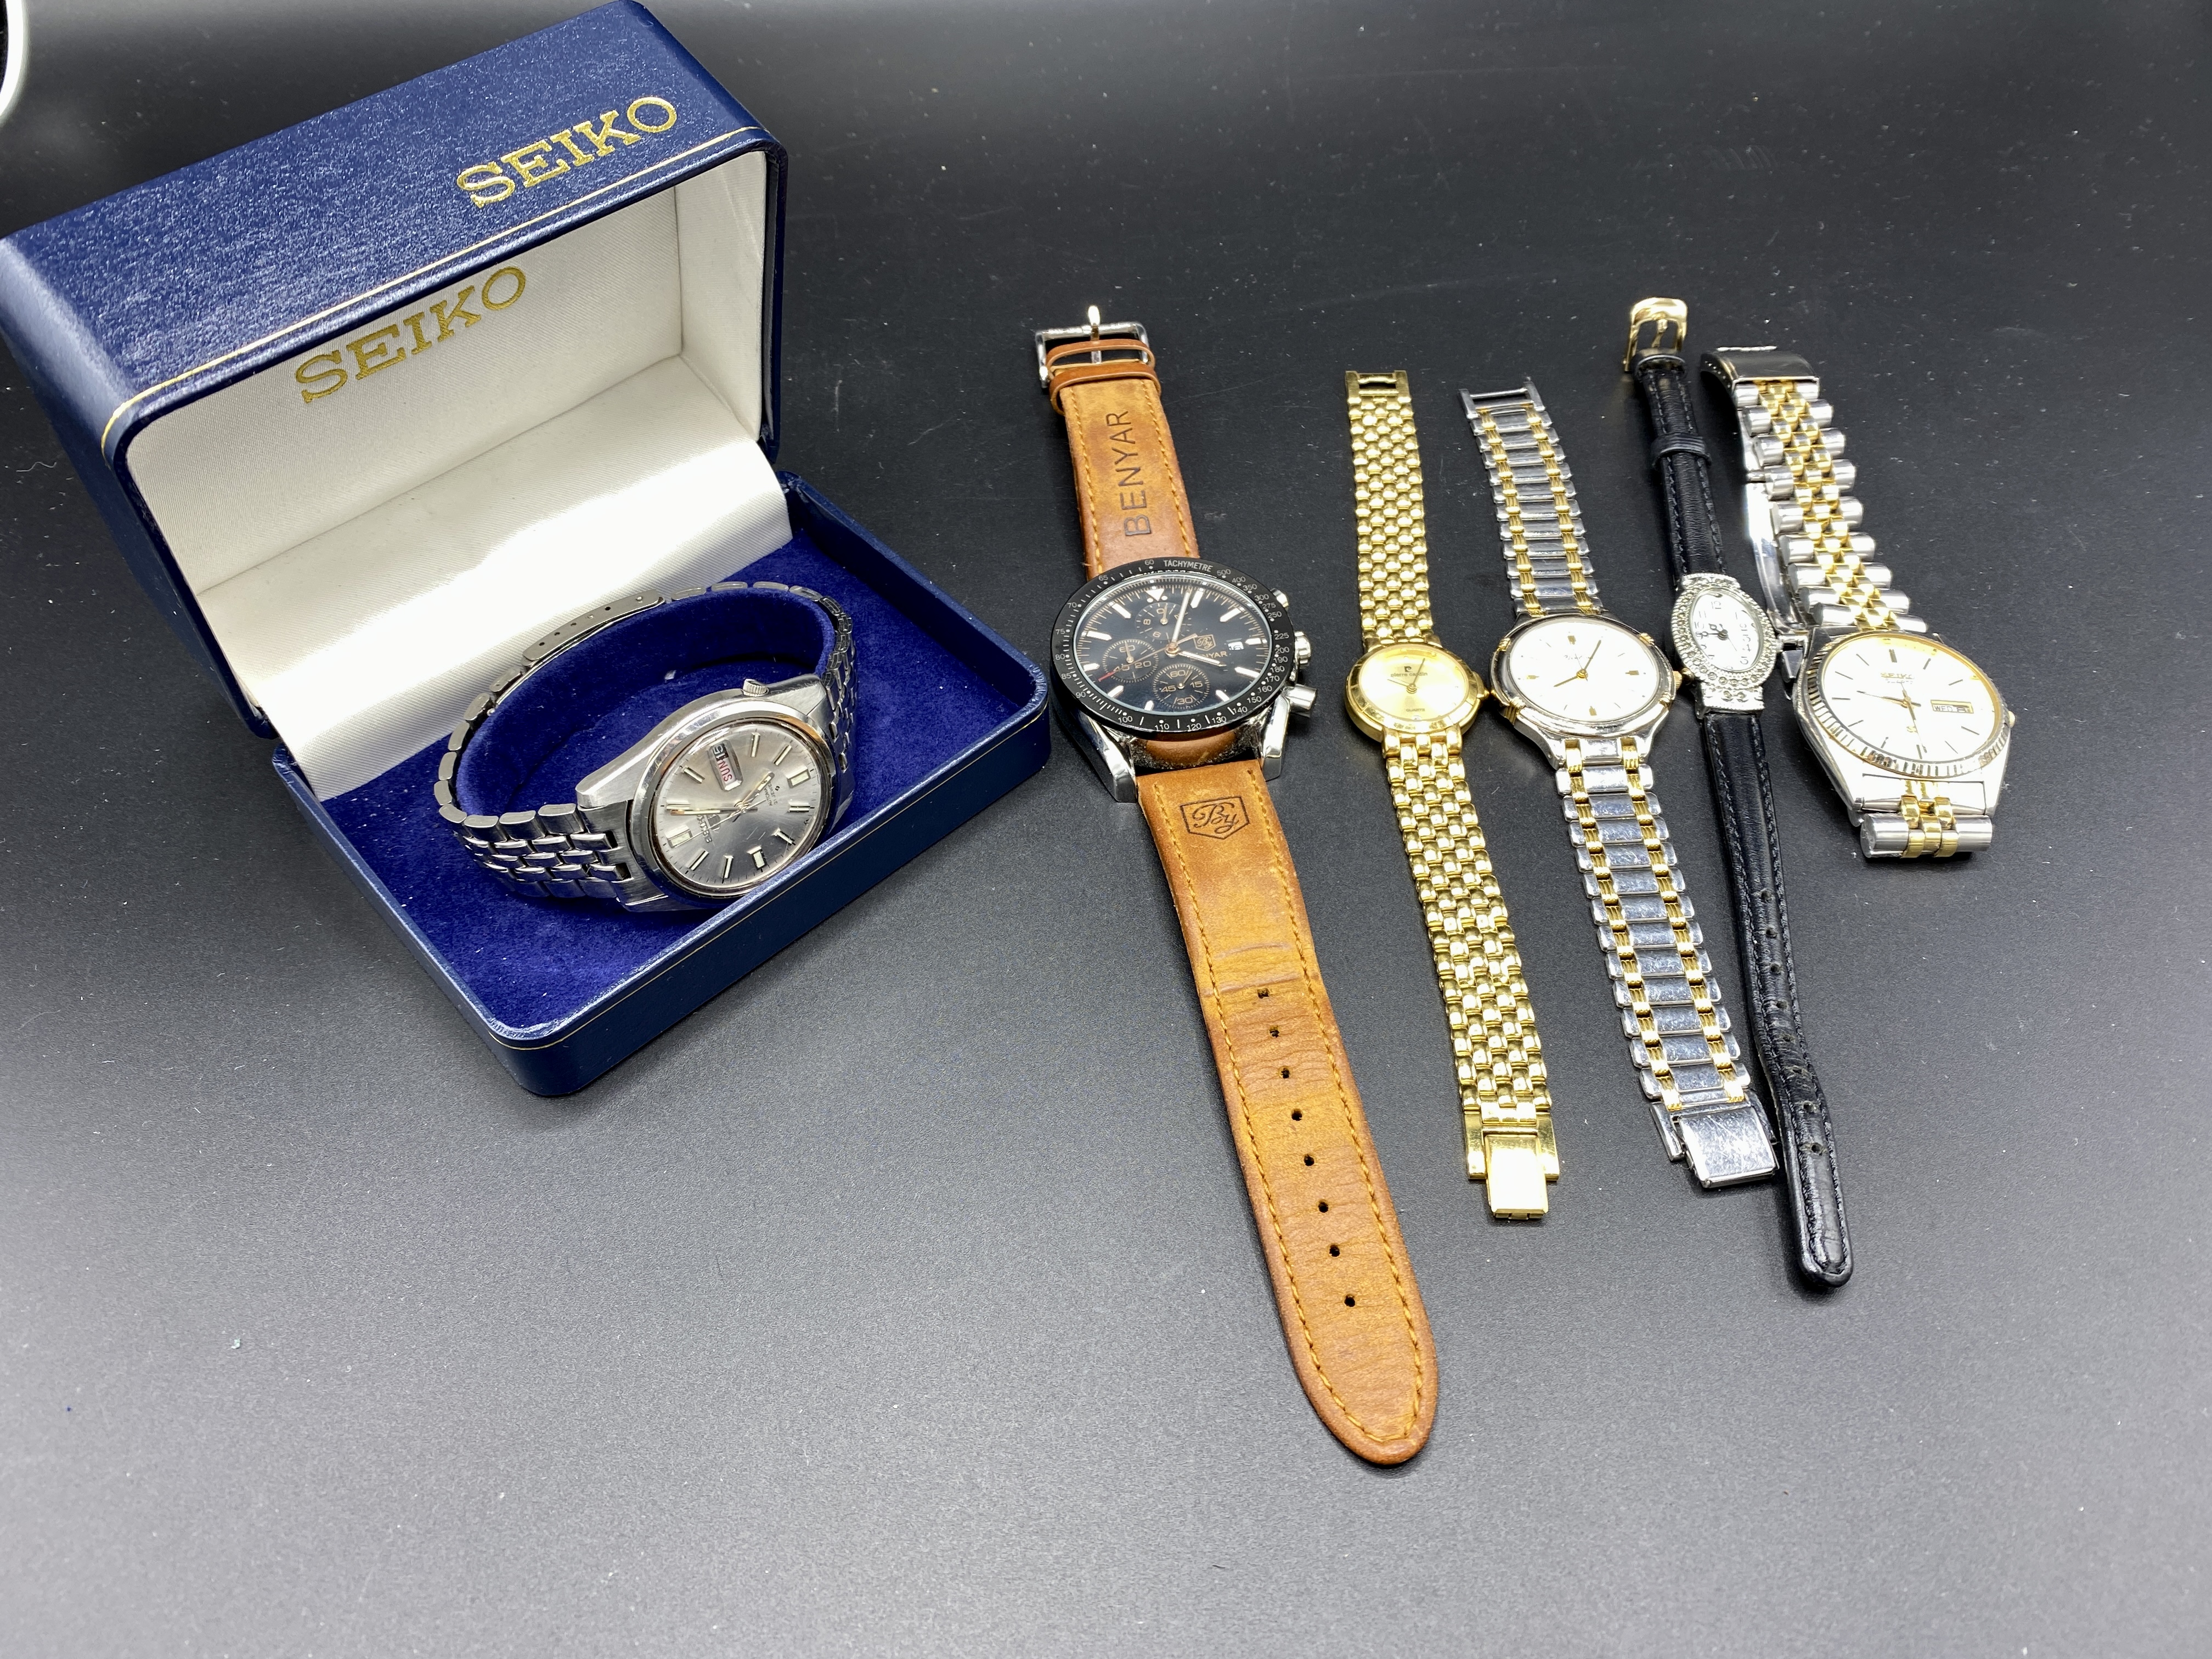 Seiko automatic gent's wrist watch with day and date aperture, with 5 other wrist watches